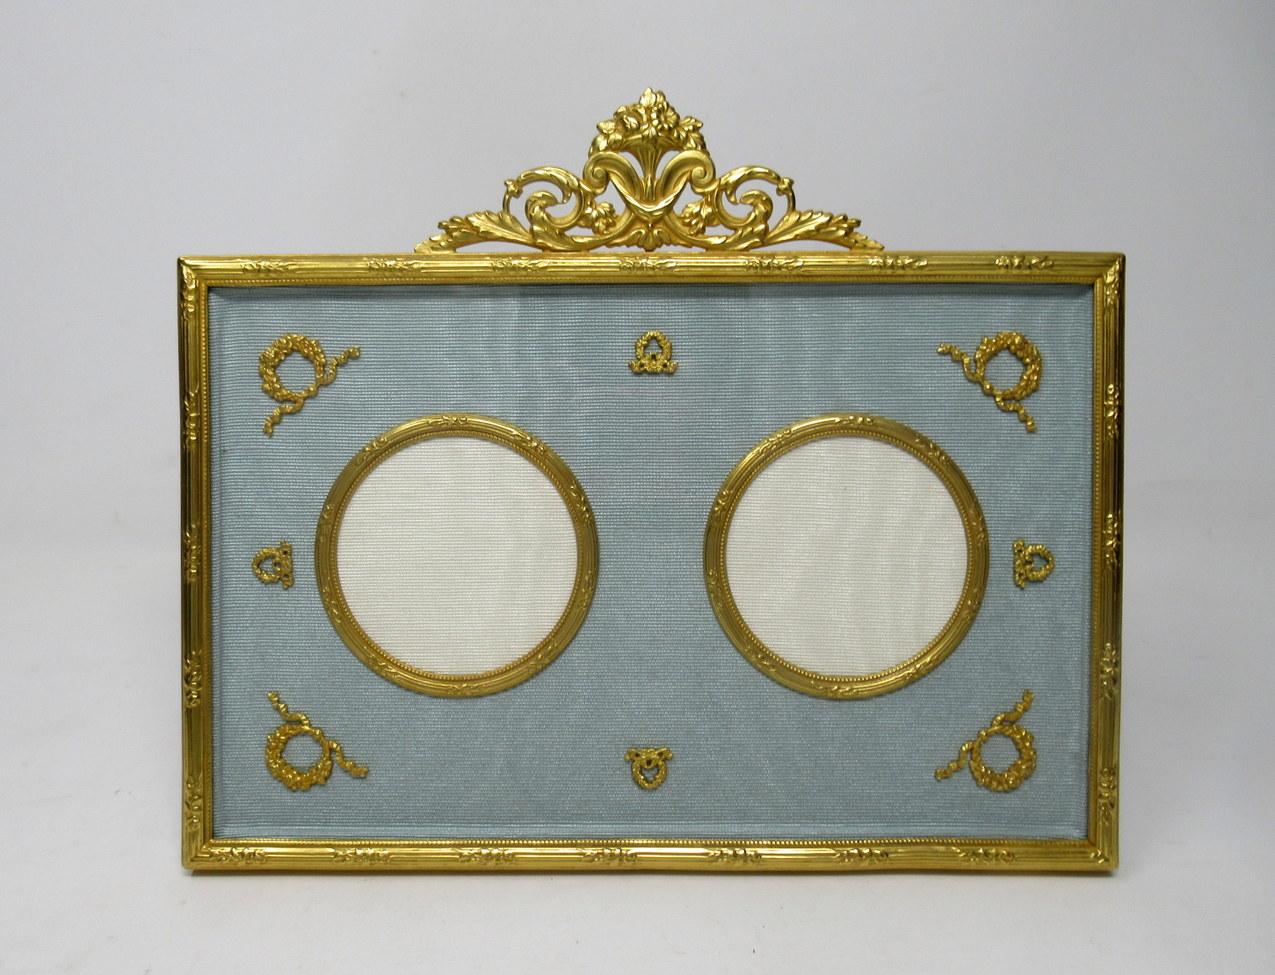 A stunning French Ormolu standing photo frame of medium proportions, mid-late 19th century.

The rectangular shaped ormolu reeded frame enclosing a pair of circular shape photo insets surrounded with finely cast applied decorations and a stunning